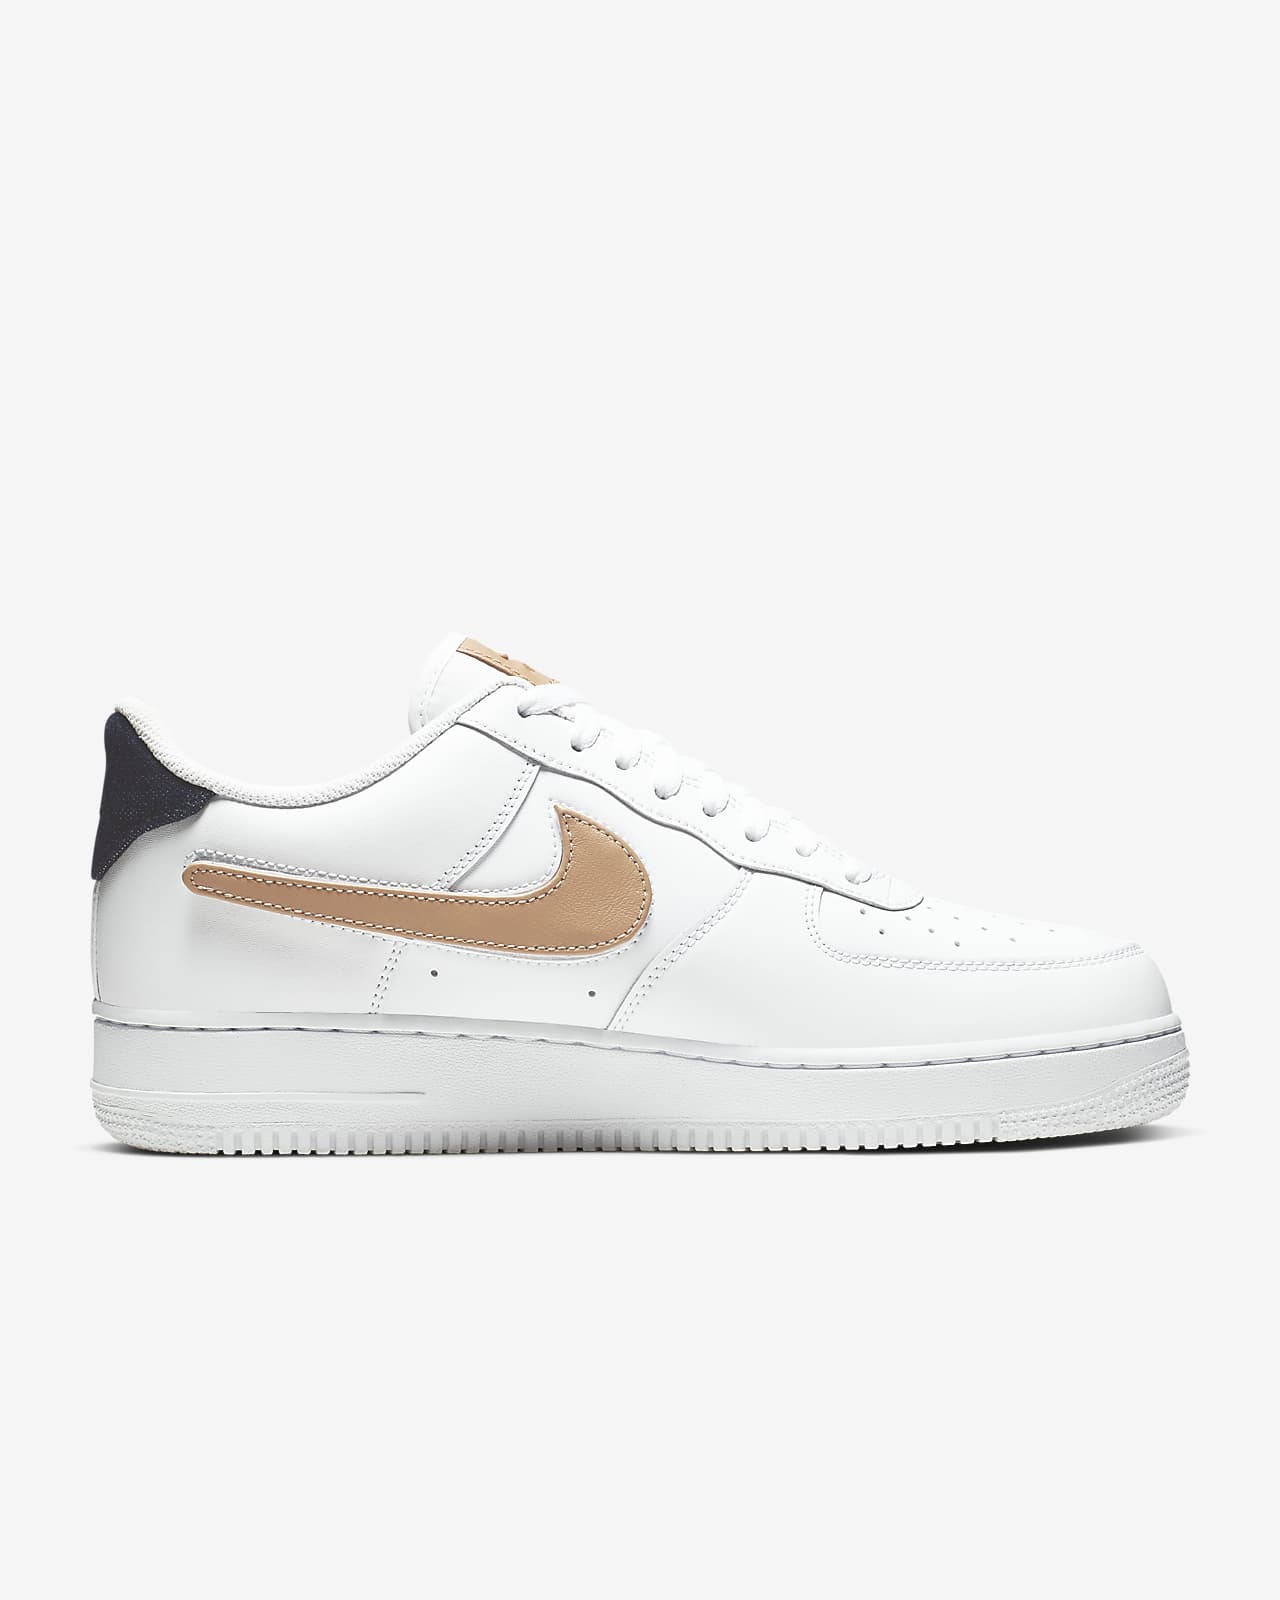 Nike Air Force 1 '07 LV8 3 Removable 